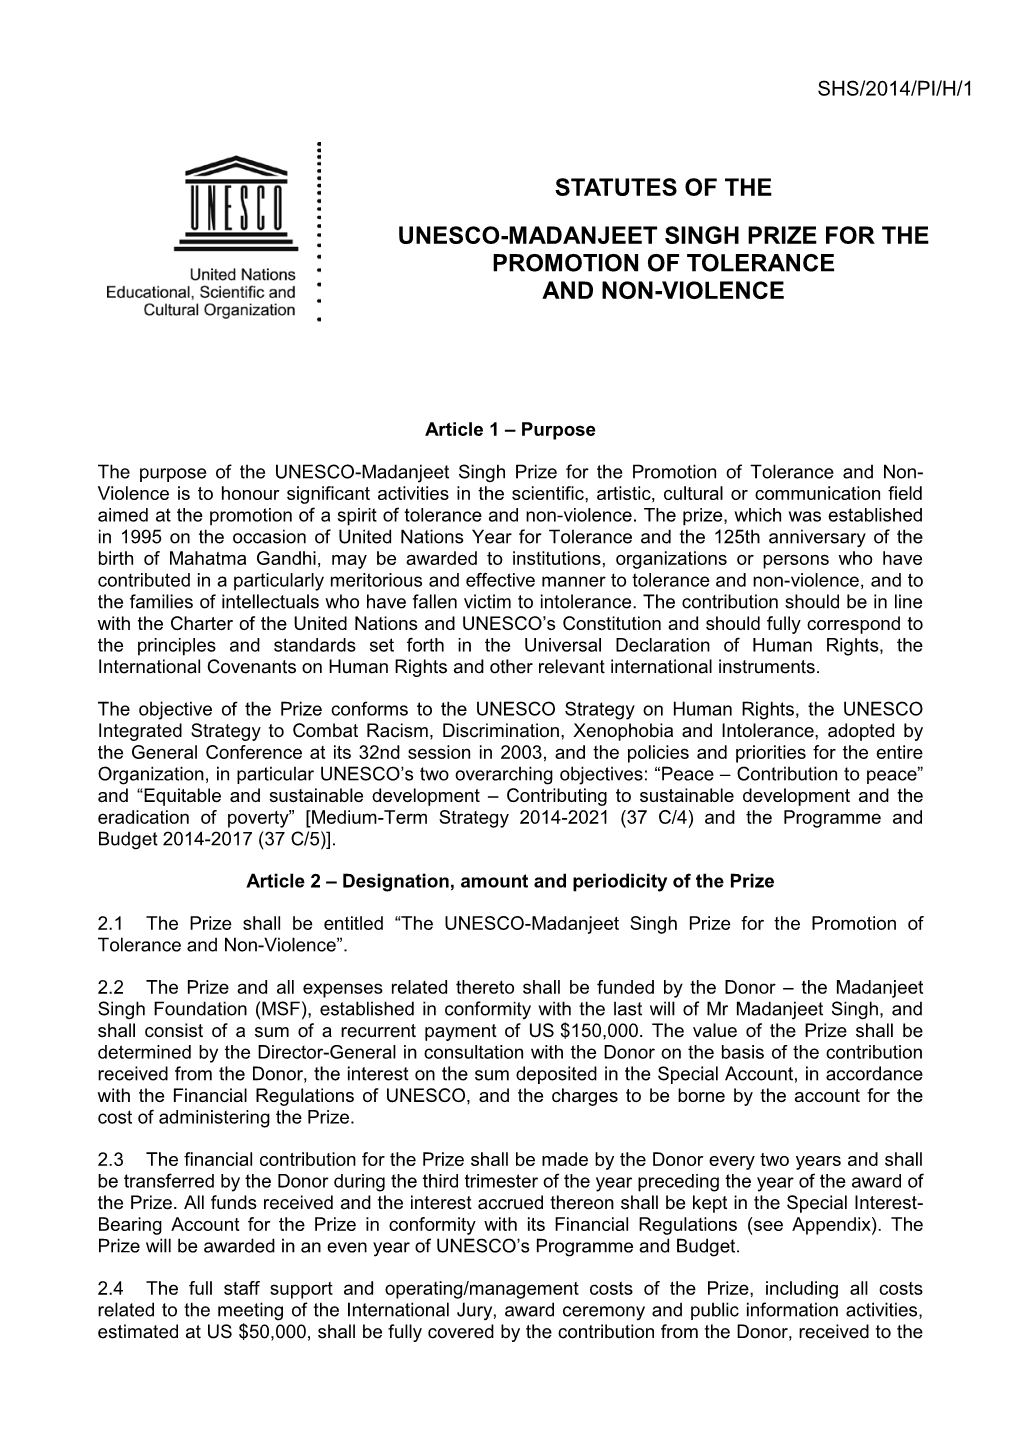 Statutes of the UNESCO-Madanjeet Singh Prize for the Promotion Of